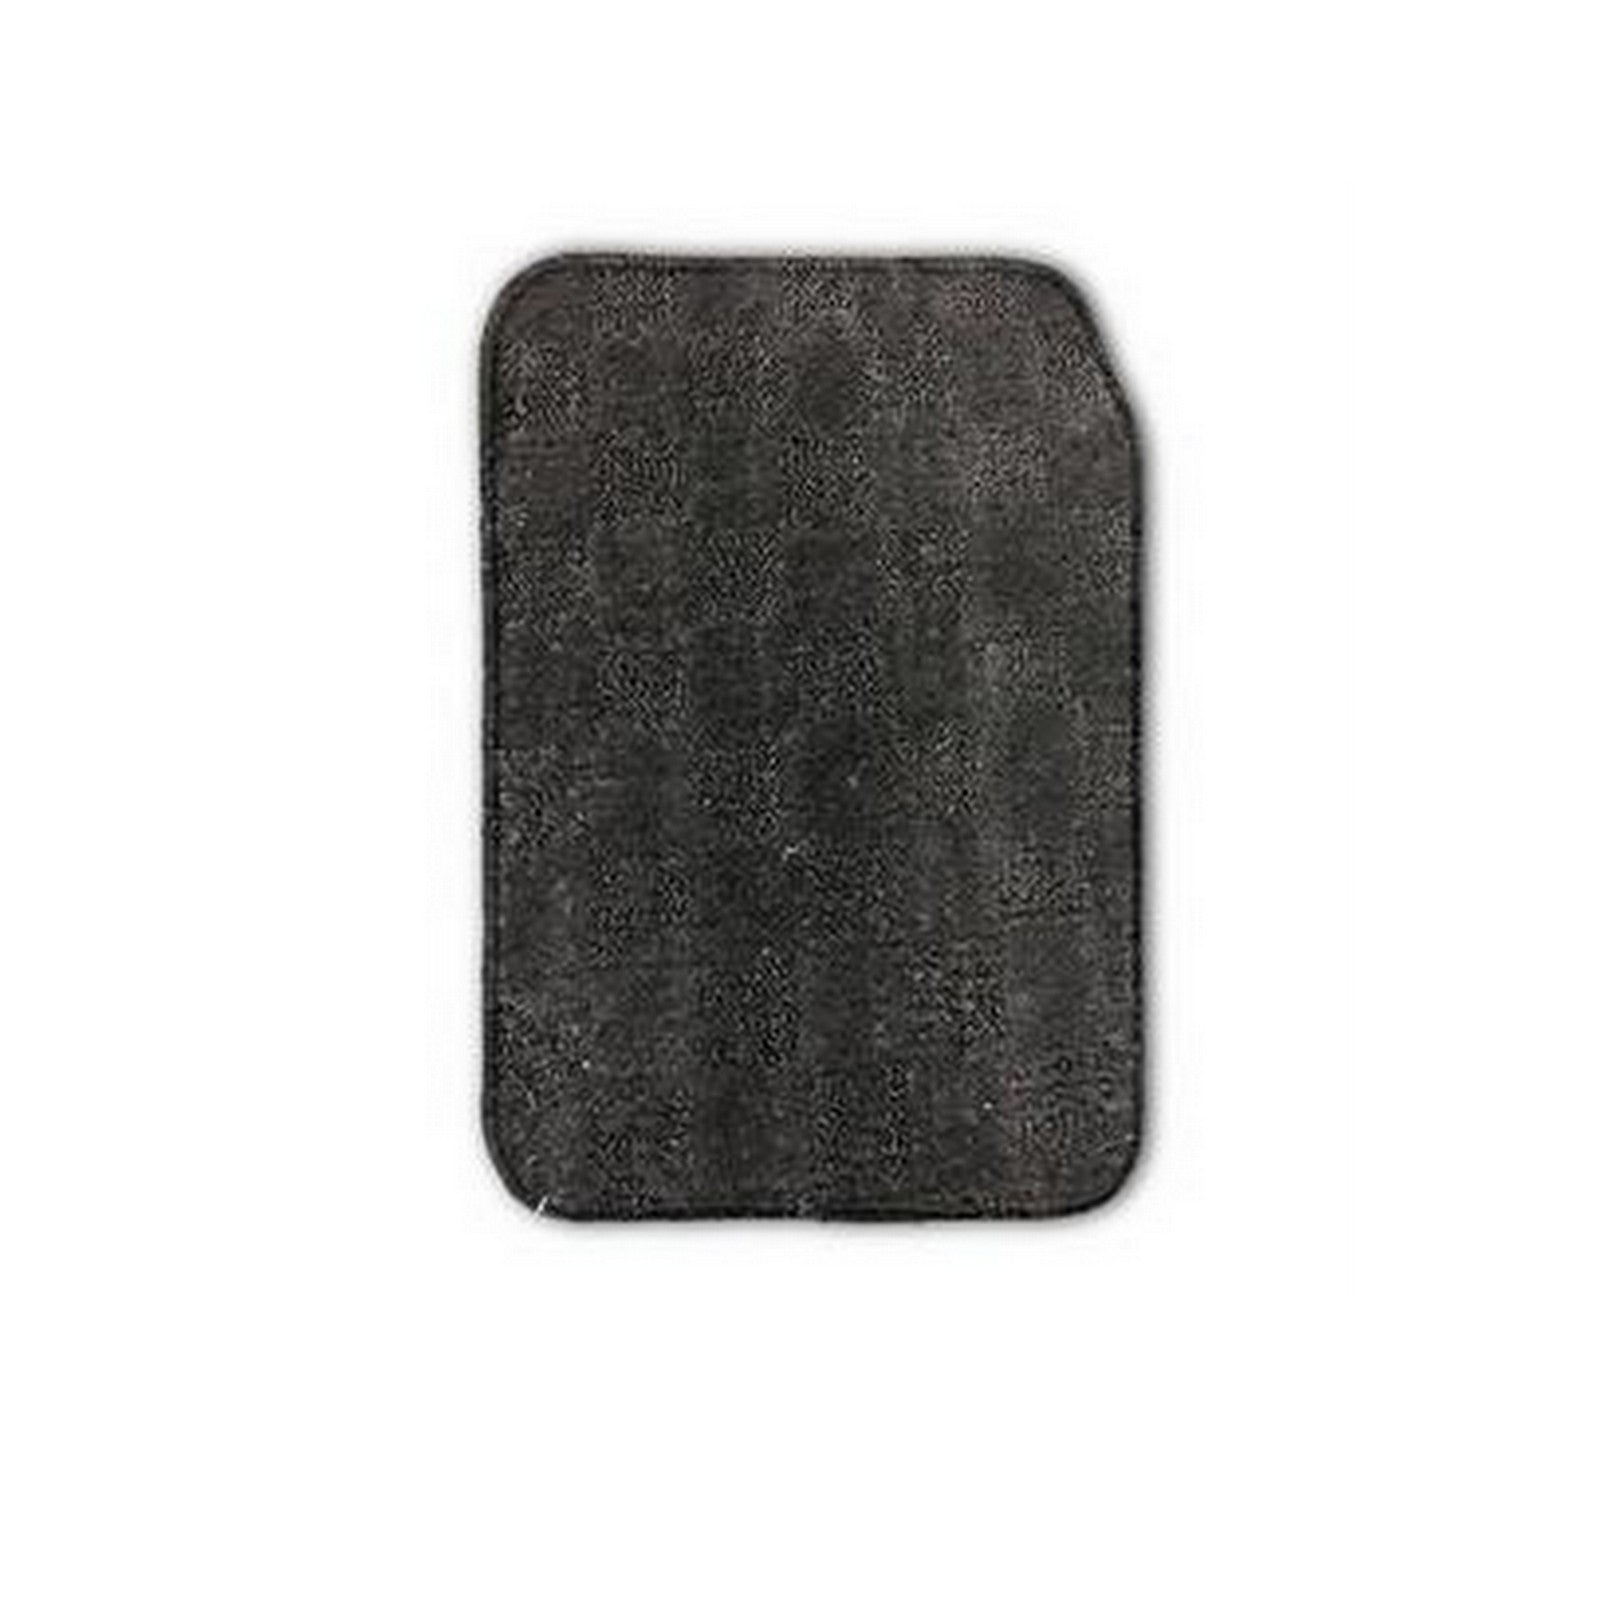 FLOOR MATS PREMIUM QUALITY FOR PRINCE PEARL